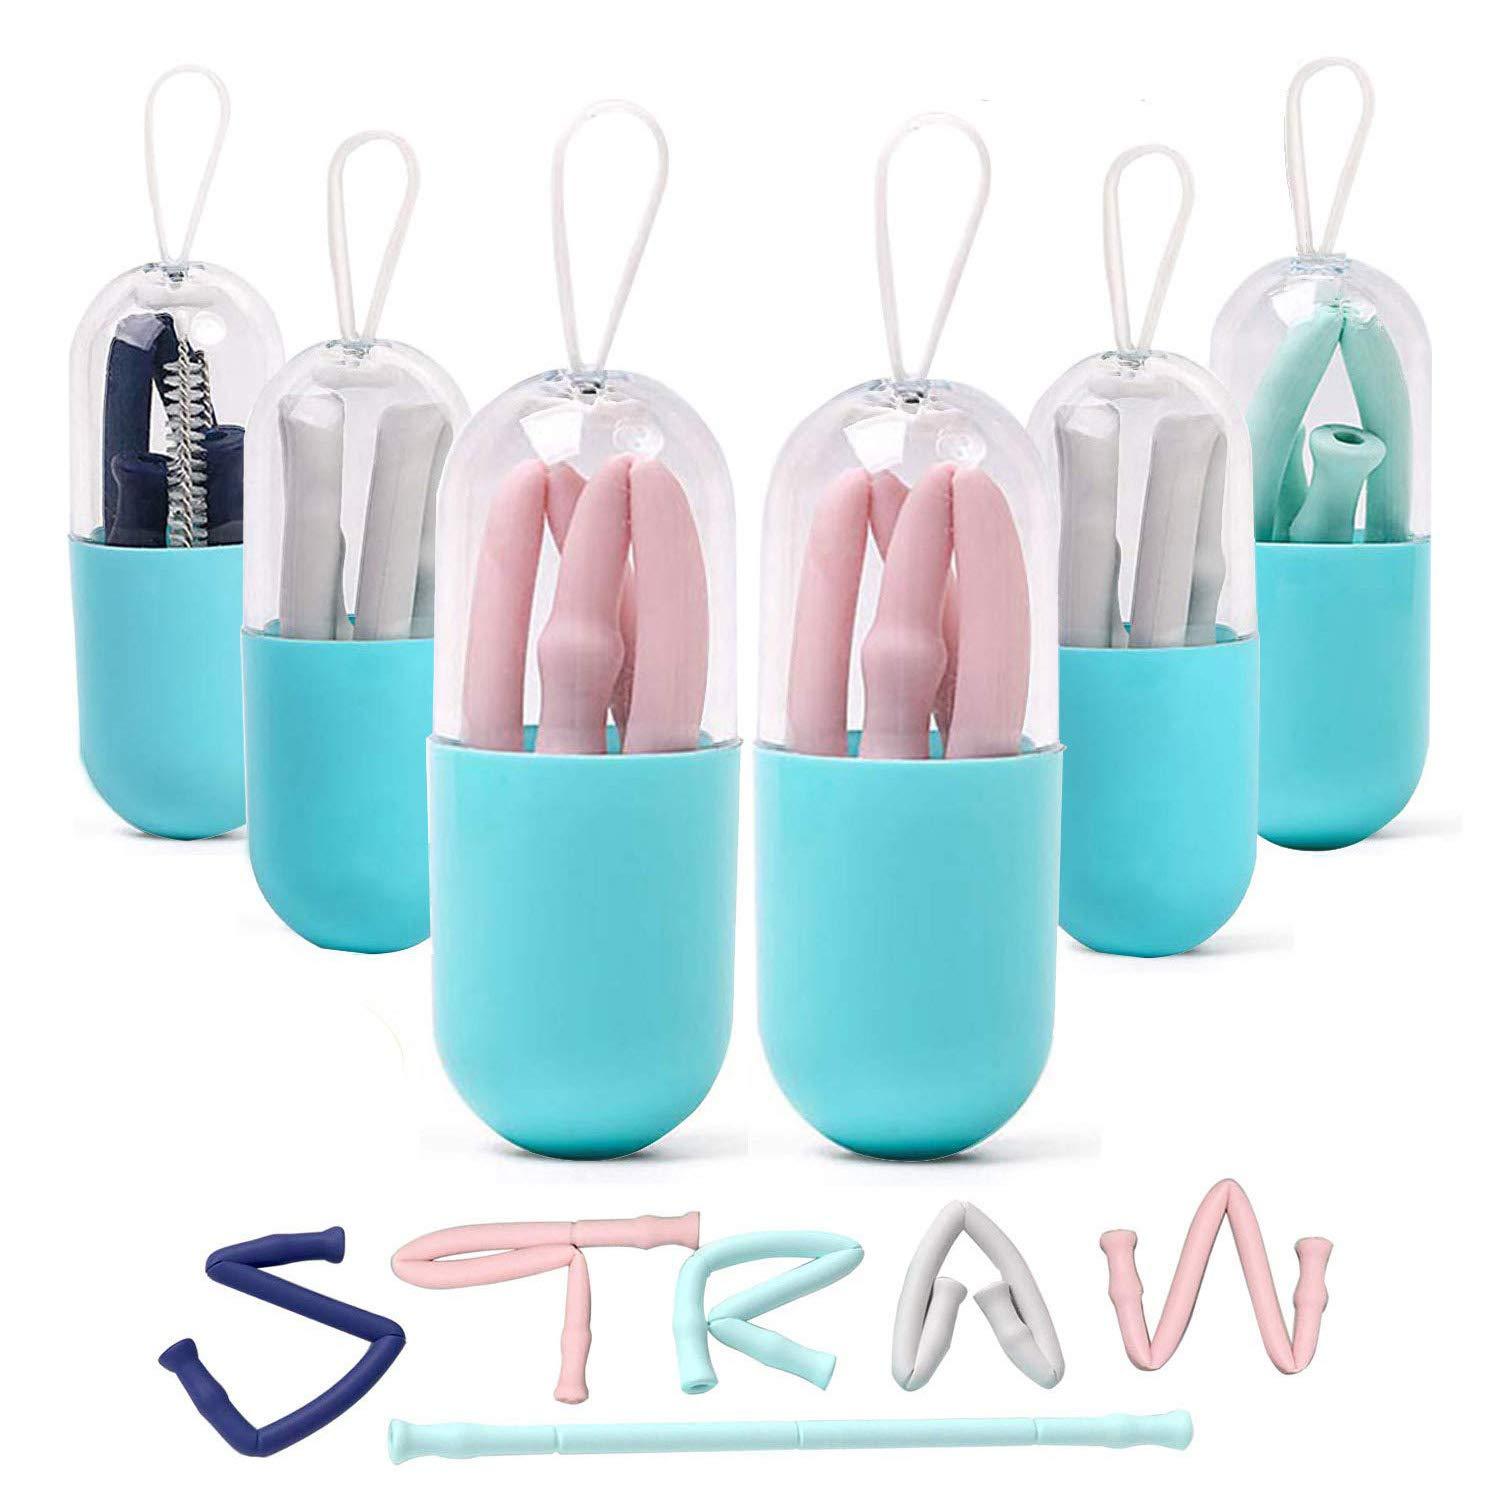 Wholesale Collapsible Silicone Straws Reusable Drinking Straw with Portable Case and Brush